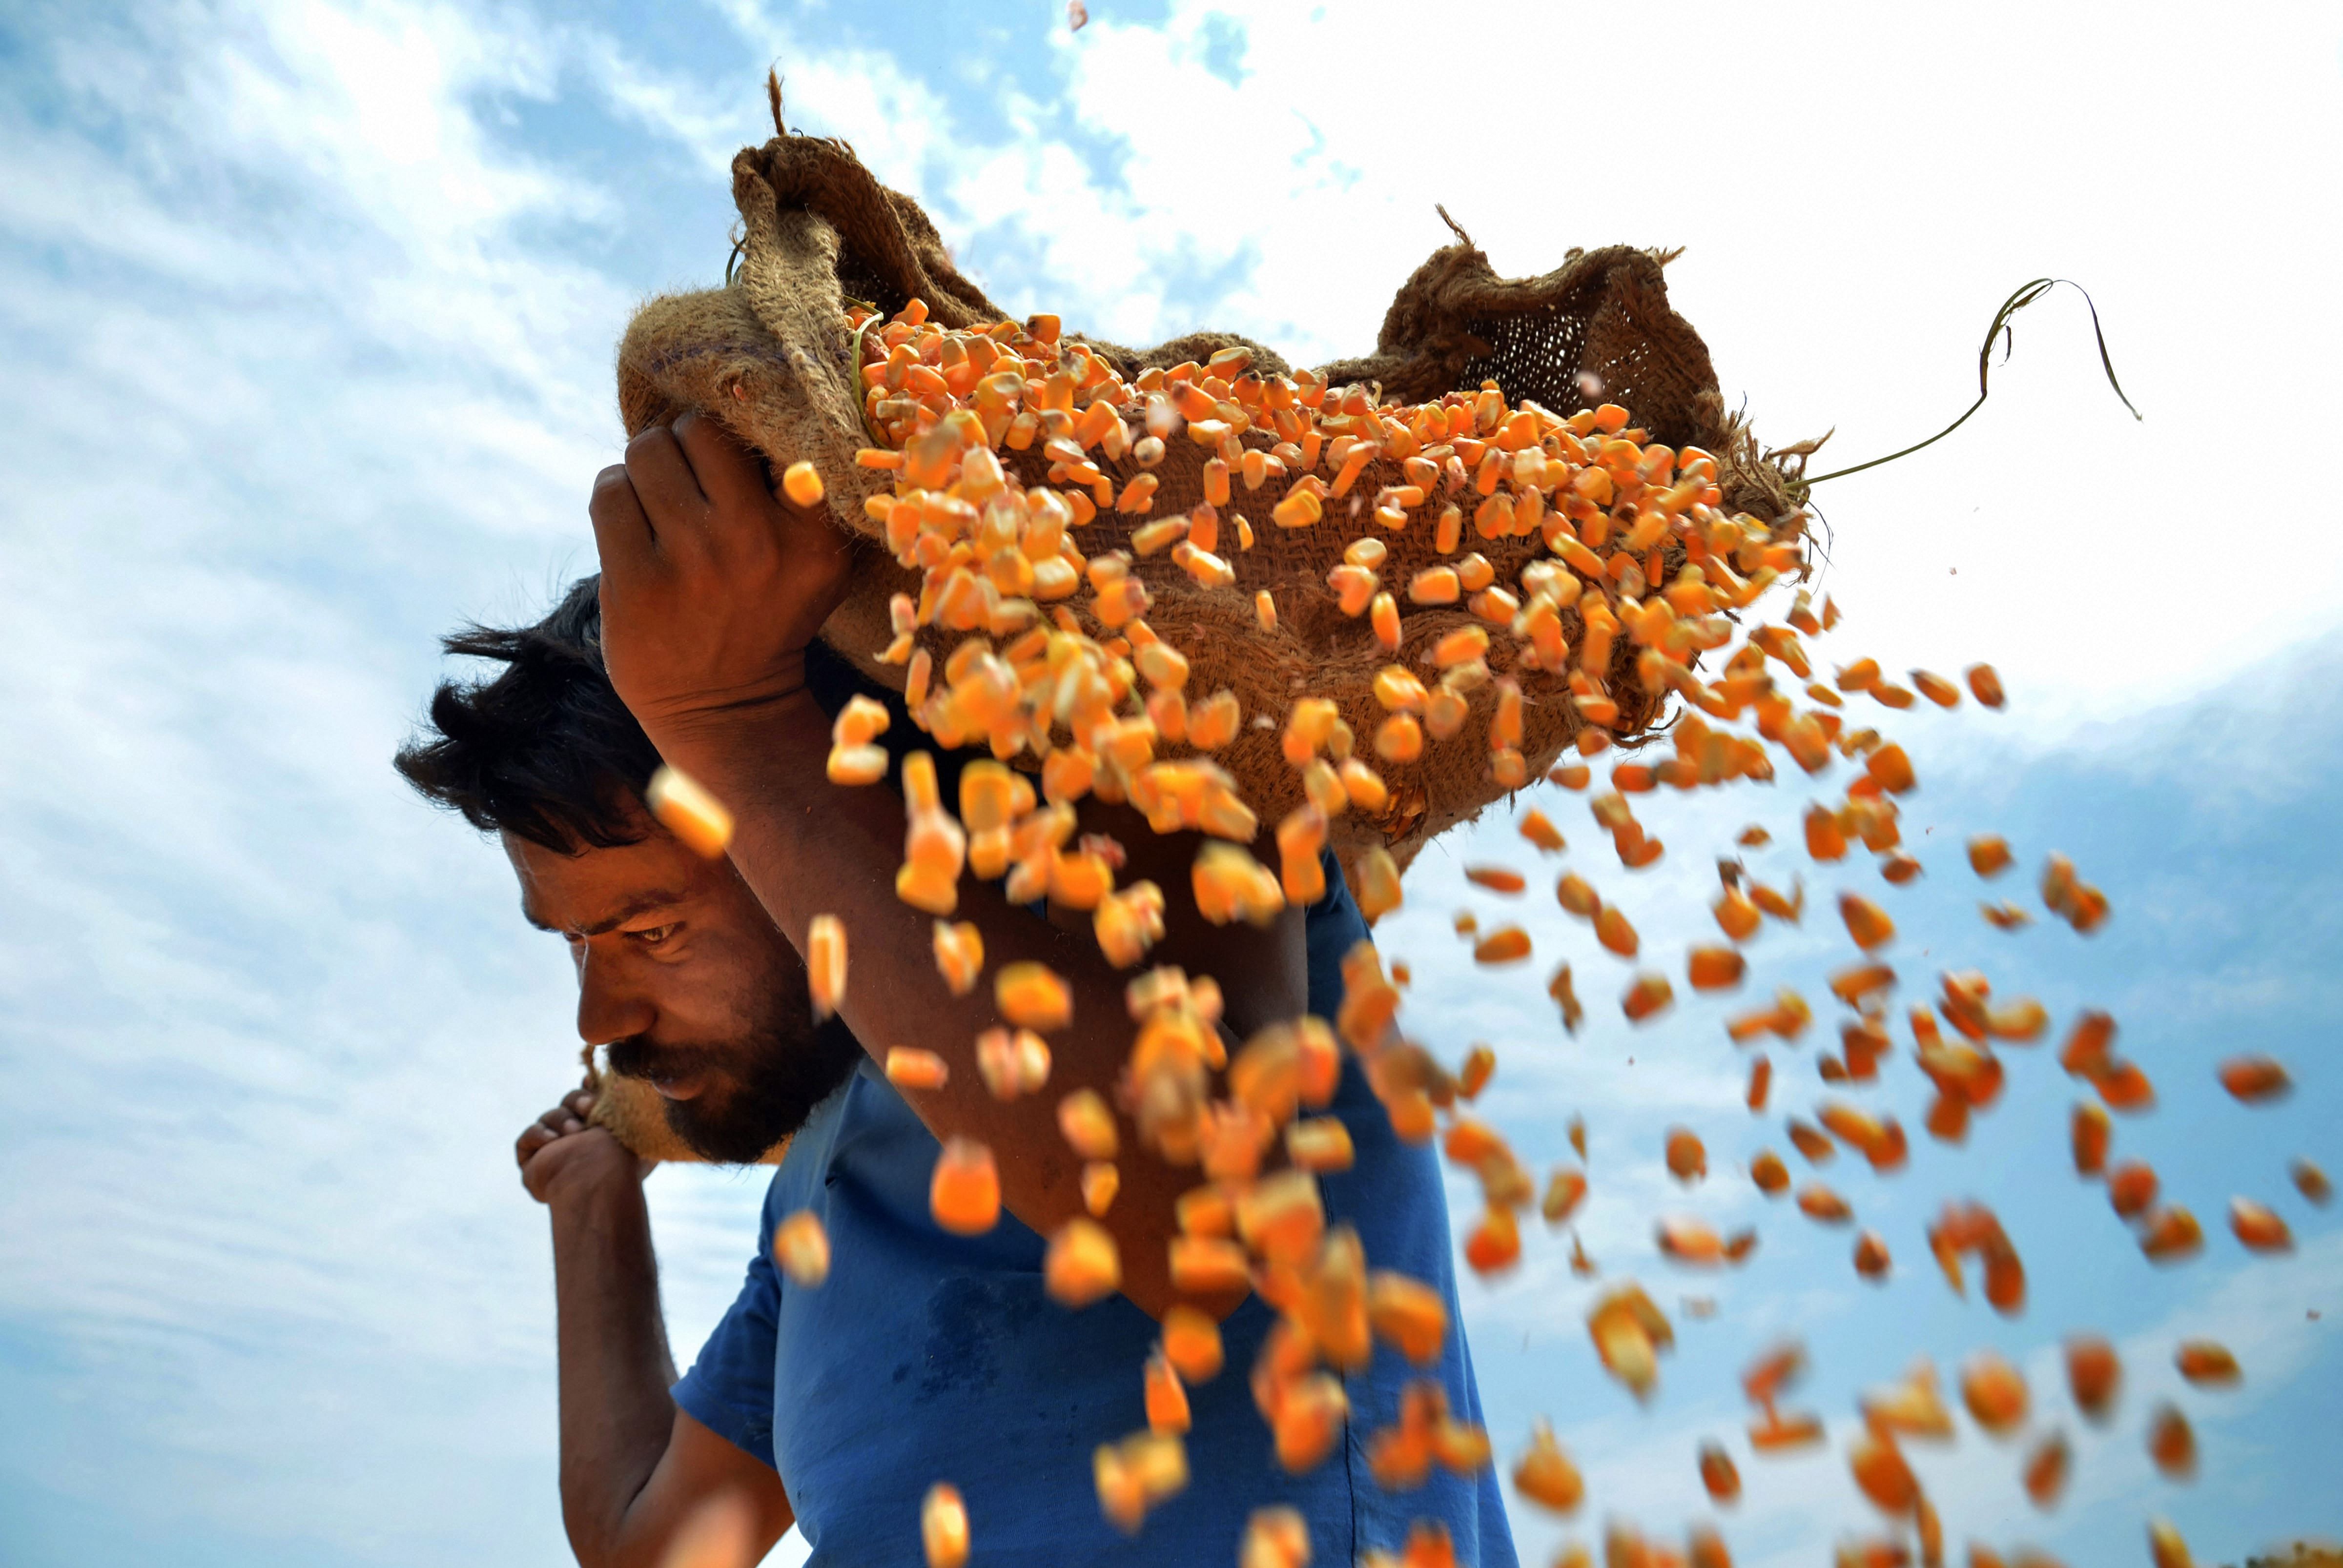 A worker spreads maize grain to dry them under the sun at a grain market in Amritsar. Credit: PTI